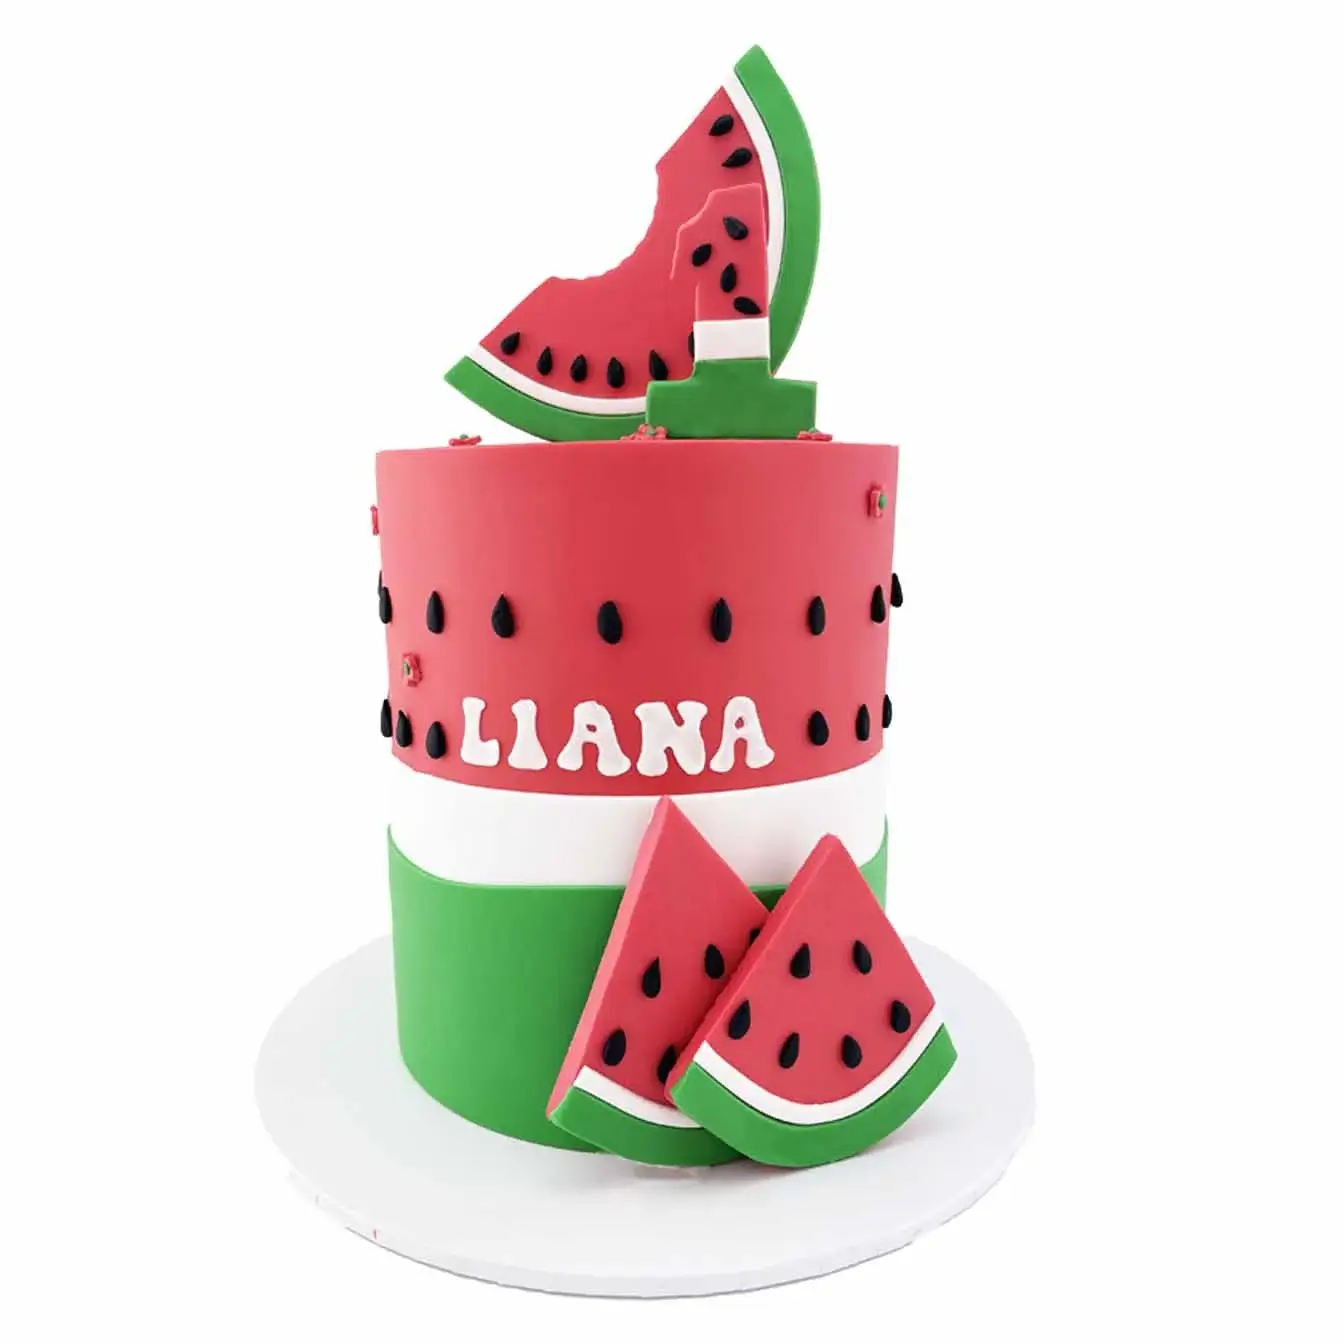 Fresh Watermelon Slice Cake - A vibrant cake with watermelon colours, black seeds, and fondant watermelon slices, reminiscent of Aussie summer delights.